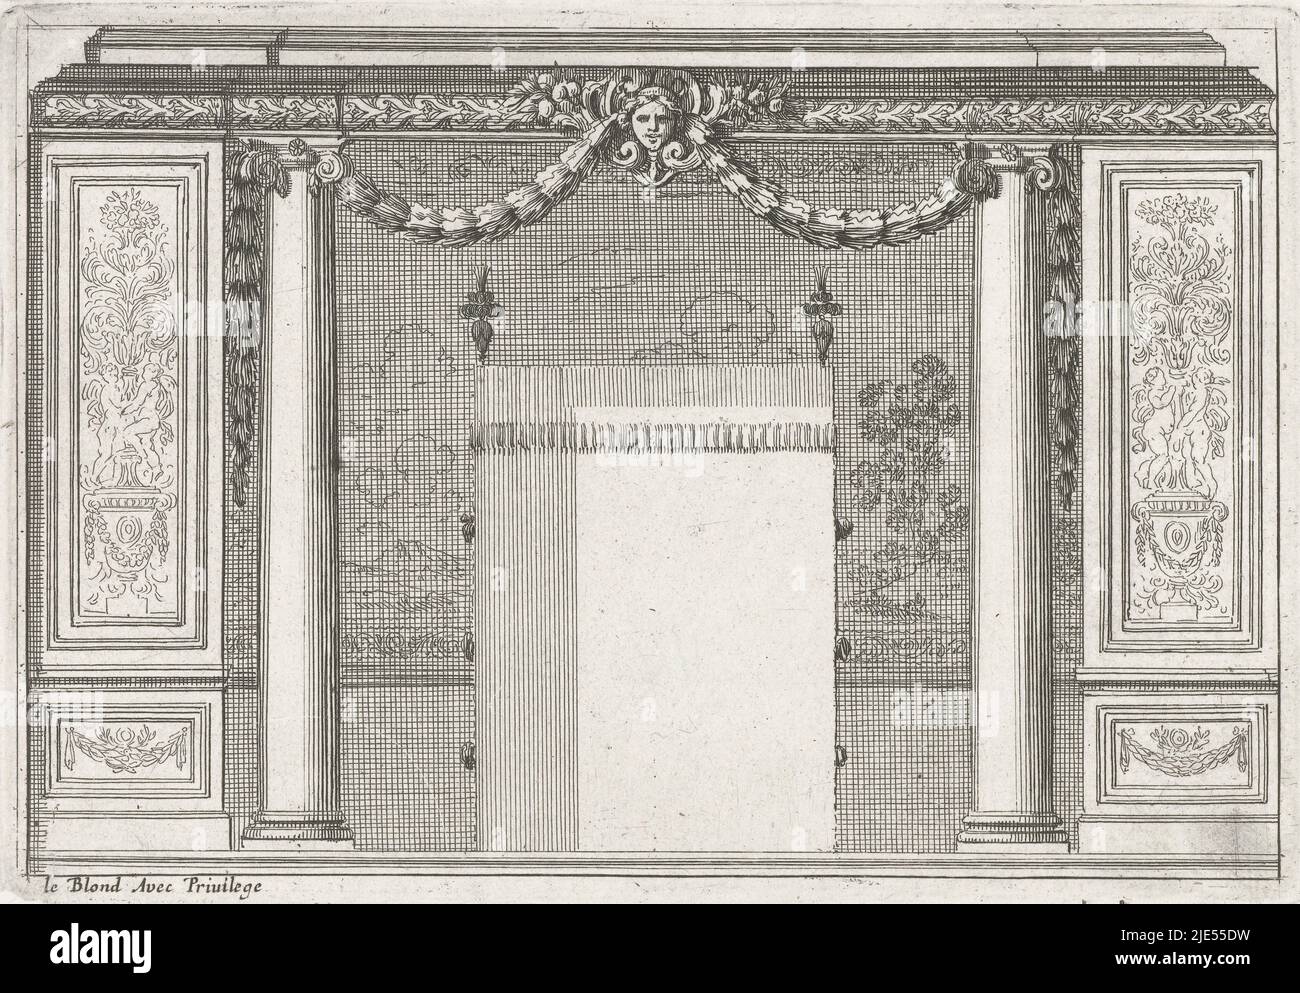 The columns are connected at the top by a garland of leaves. On both sides there is wooden panelling with an ornamental panel. From series of 6 leaves, Alcove closed by two Ionic columns Alkoven (series title)., print maker: Jean Lepautre, Jean Lepautre, publisher: Jean Leblond (I), (mentioned on object), print maker: France, (possibly), France, (possibly), publisher: Paris, c. 1650, paper, etching, h 137 mm × w 199 mm Stock Photo